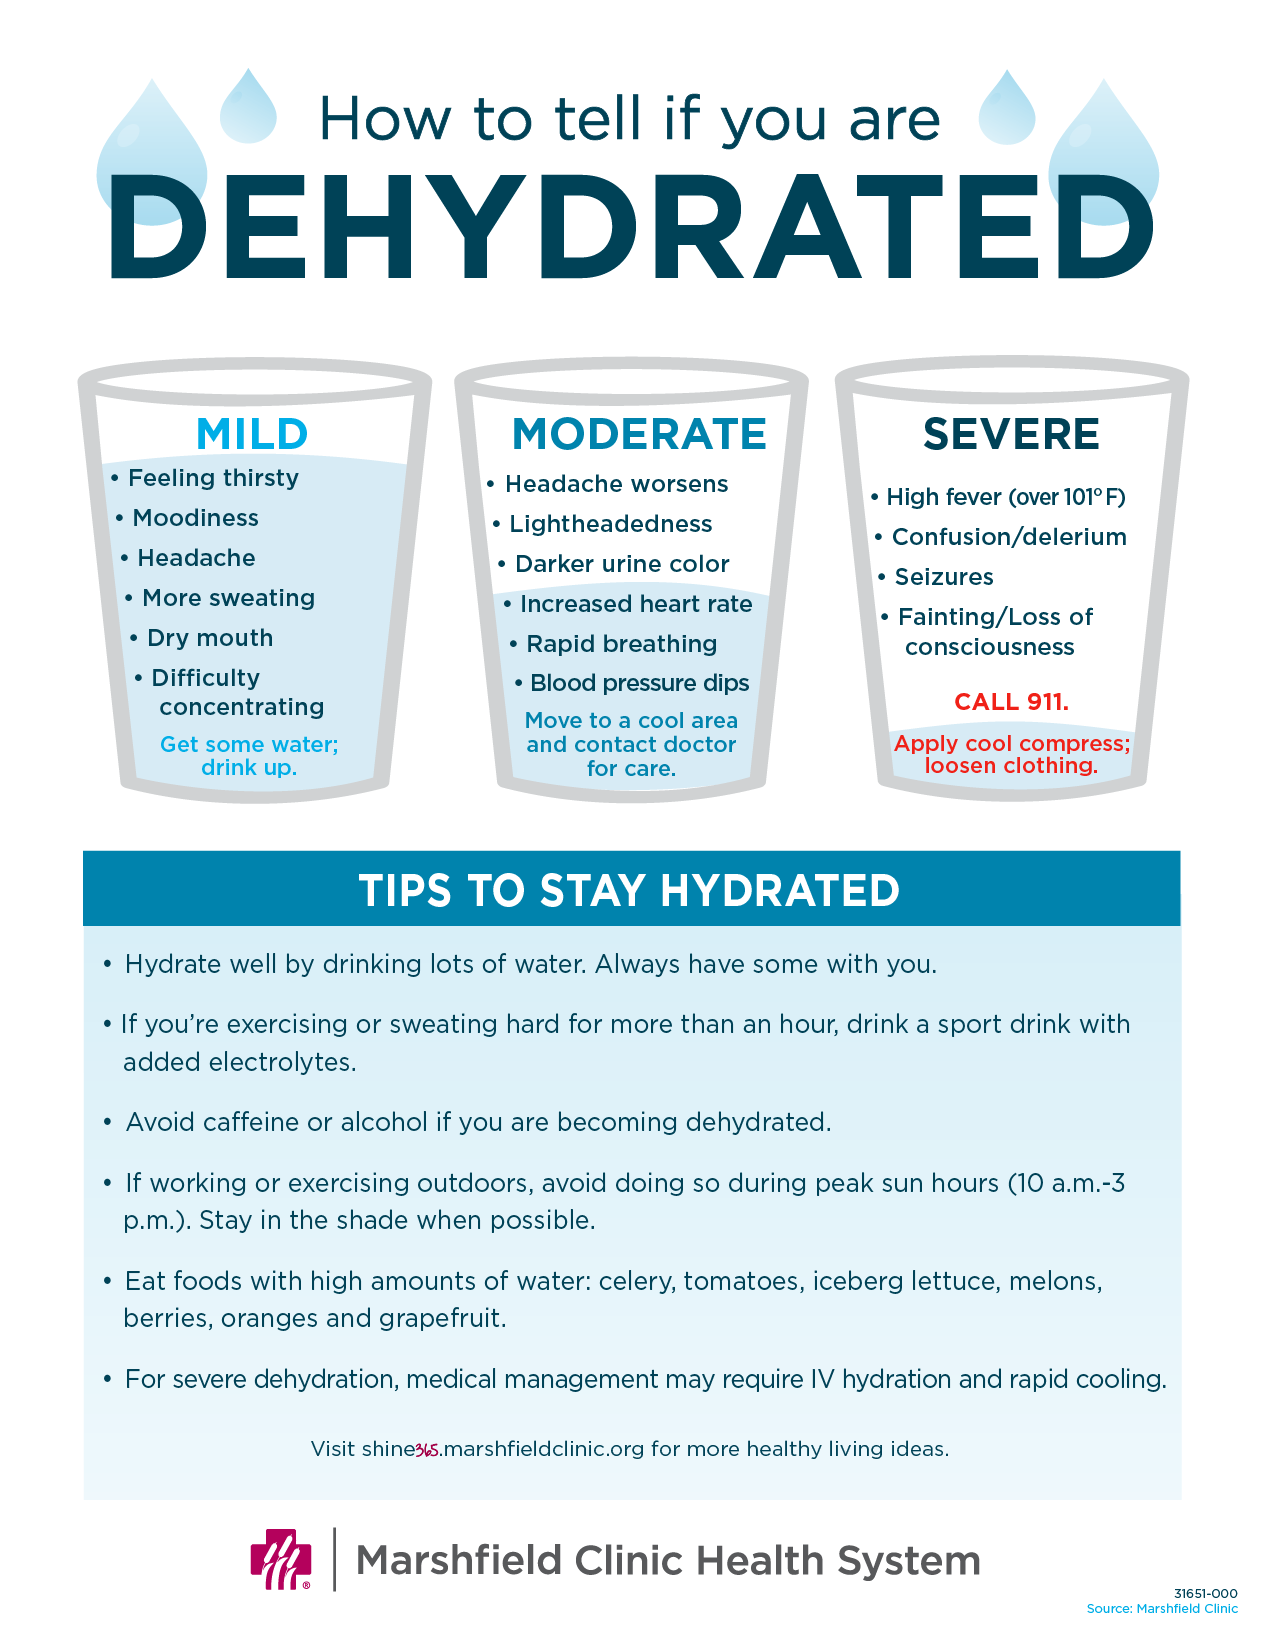 How to tell if you are dehydrated. This chart shows ways to know signs of dehydration and tips to stay hydrated